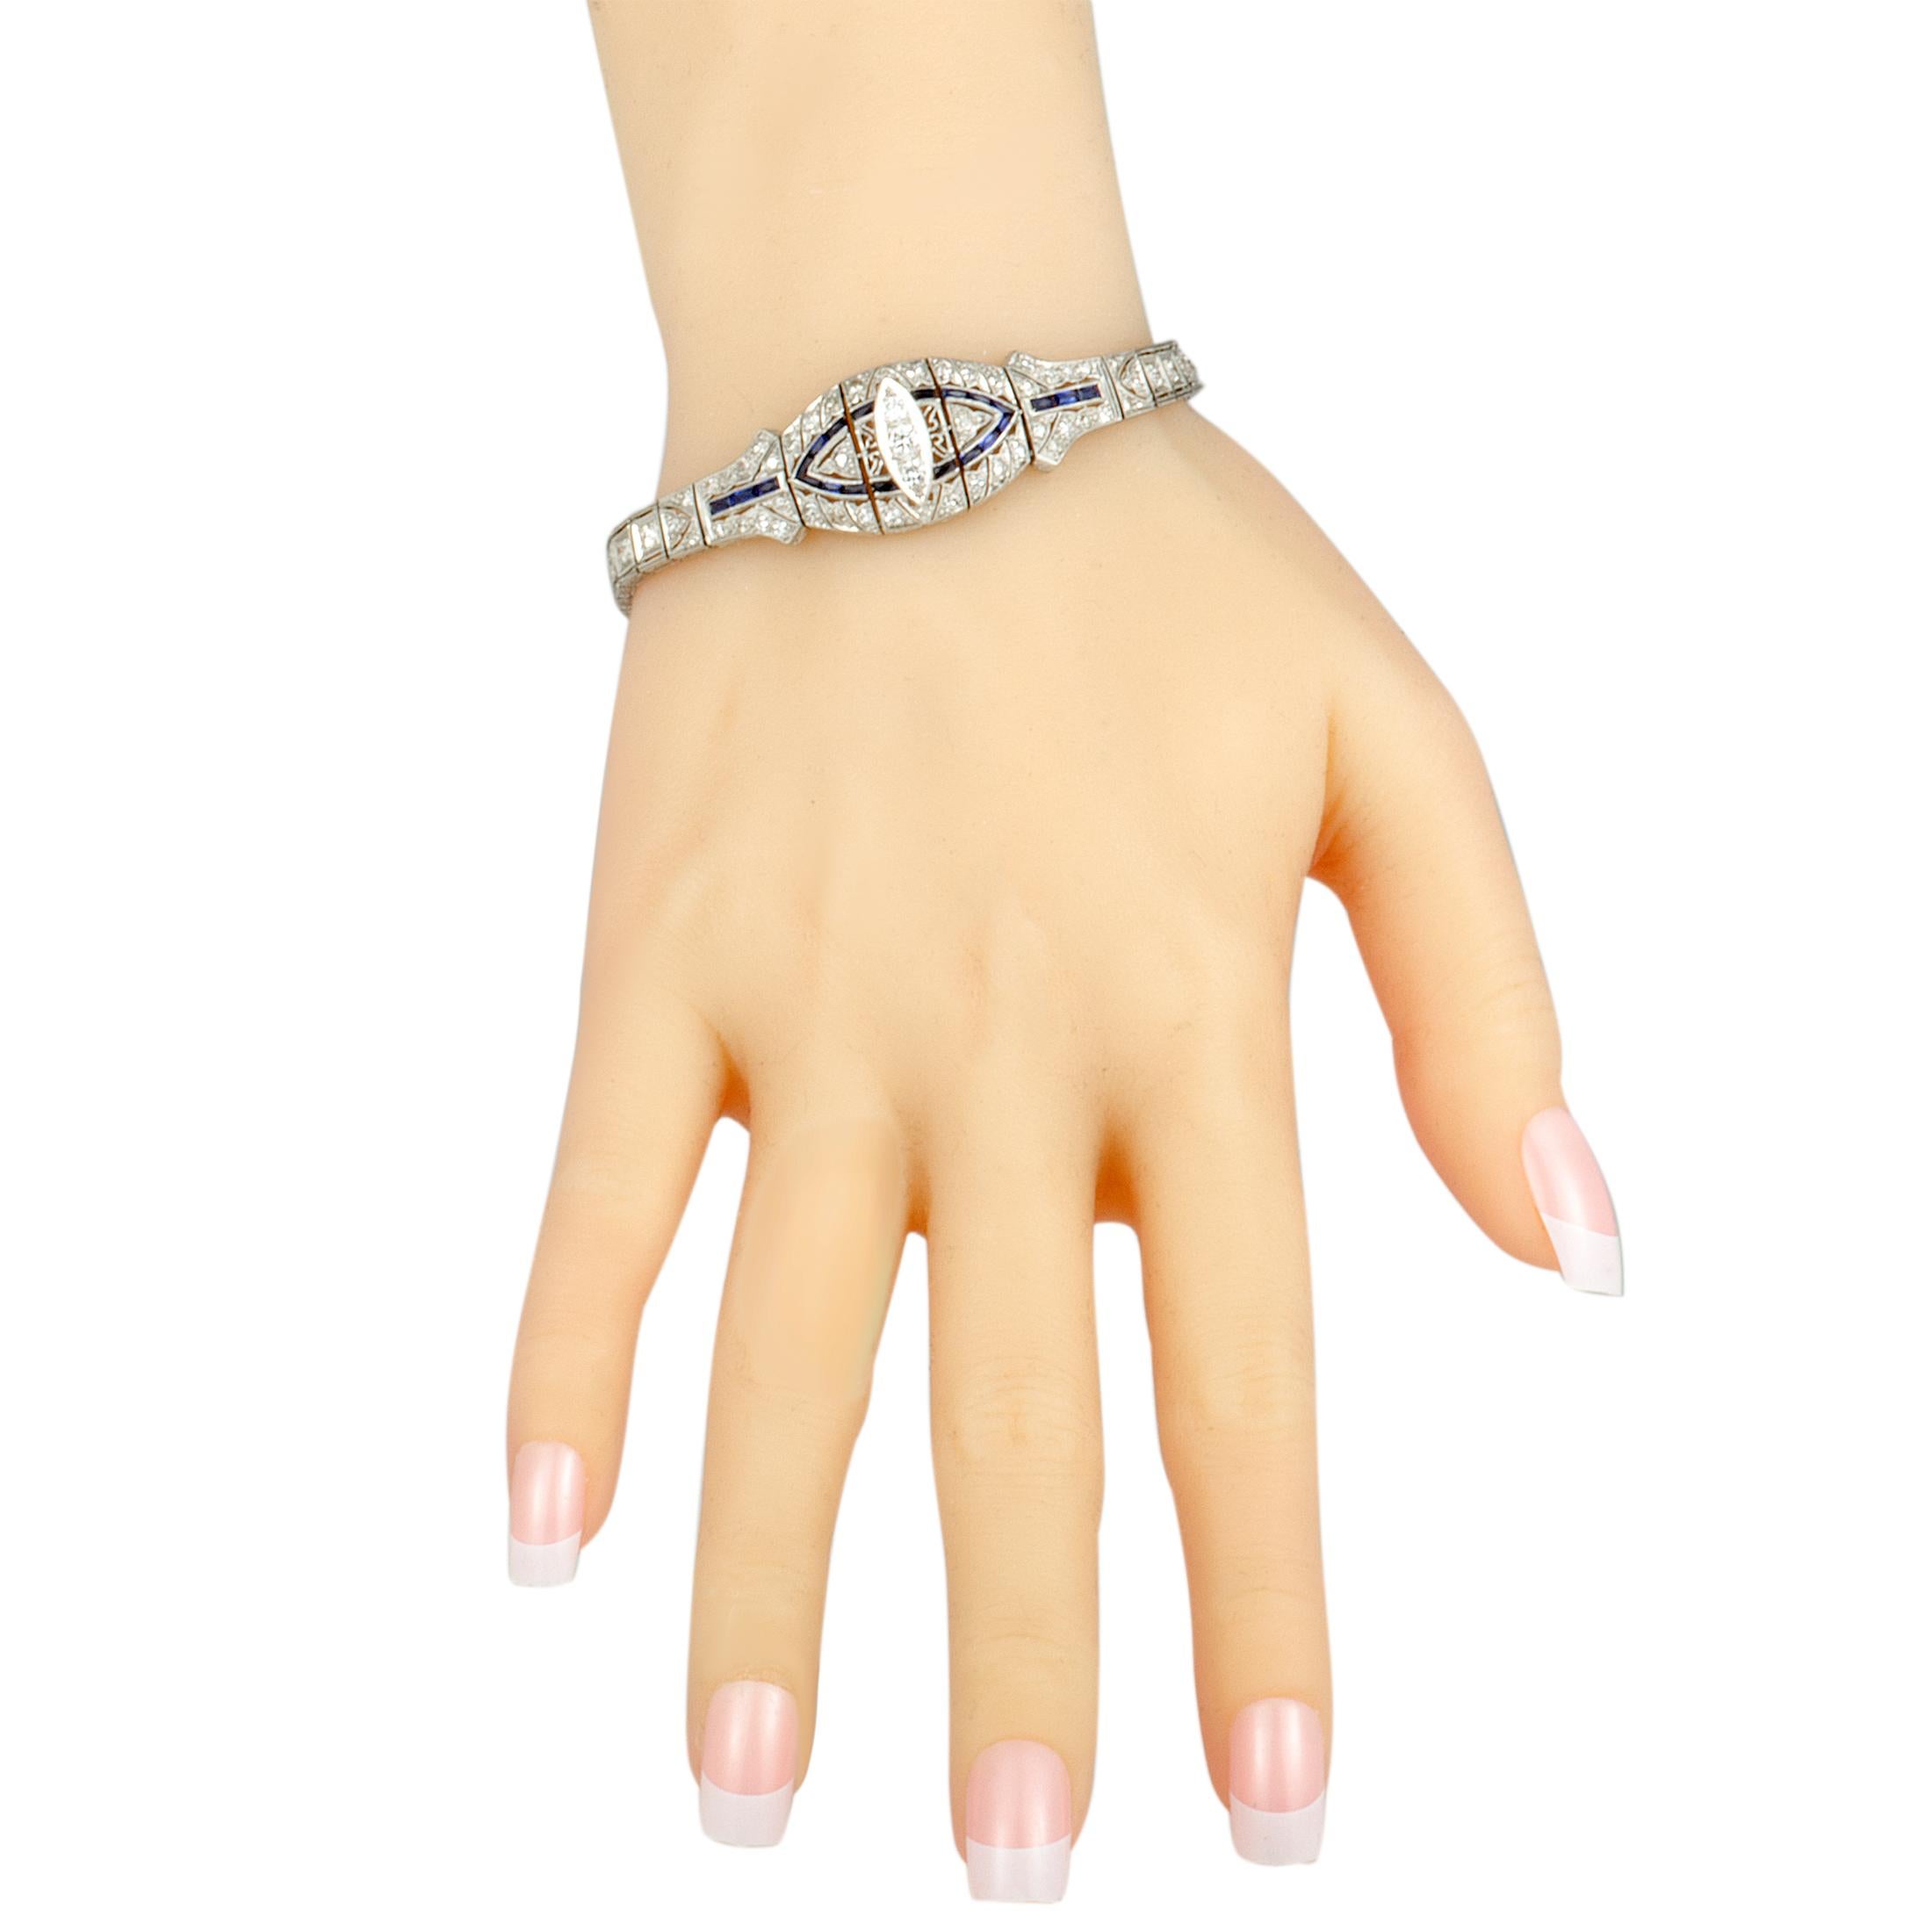 With its enticingly intricate Art Deco design, this fascinating bracelet is a piece of astounding aesthetic and artistic value that will accentuate any ensemble of yours in a splendidly classy fashion. The bracelet is made of platinum and lavishly